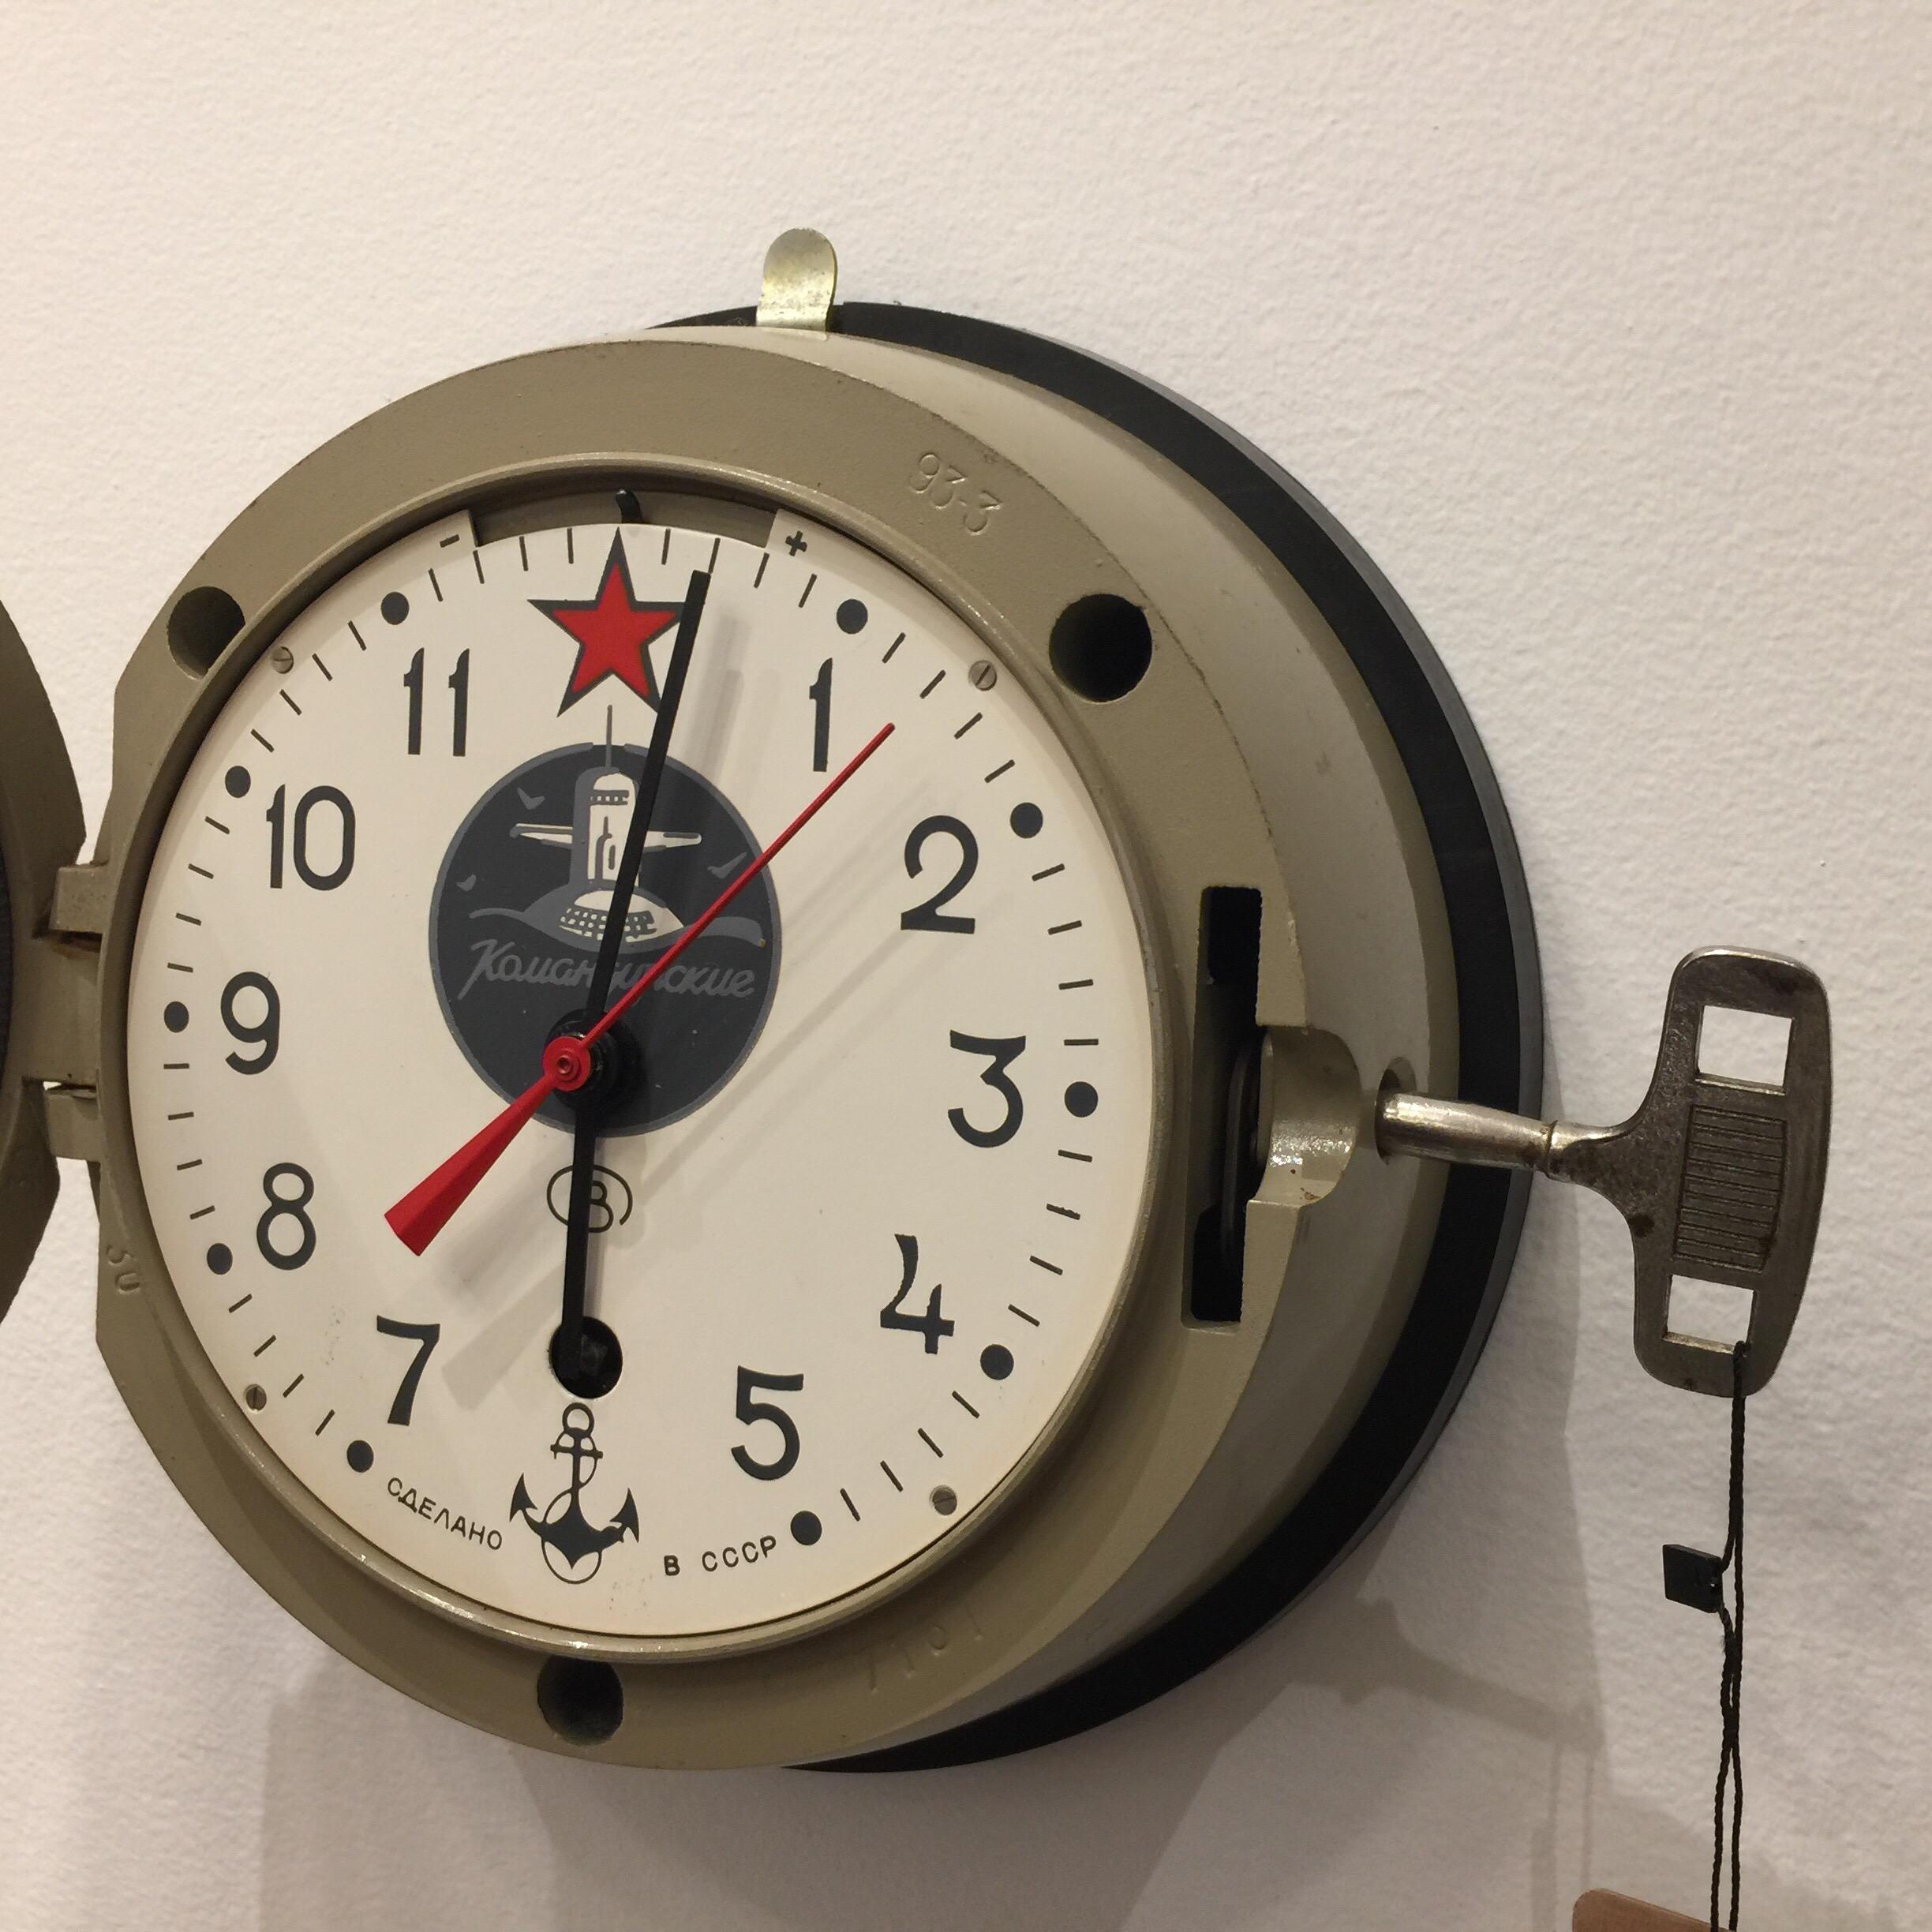 This wind-able Soviet (Russian Likely) submarine clock is in pristine vintage condition and working perfectly! All original winding key and face which opens for setting the time. This is whimsical and collectible from the height of the Iron Curtain